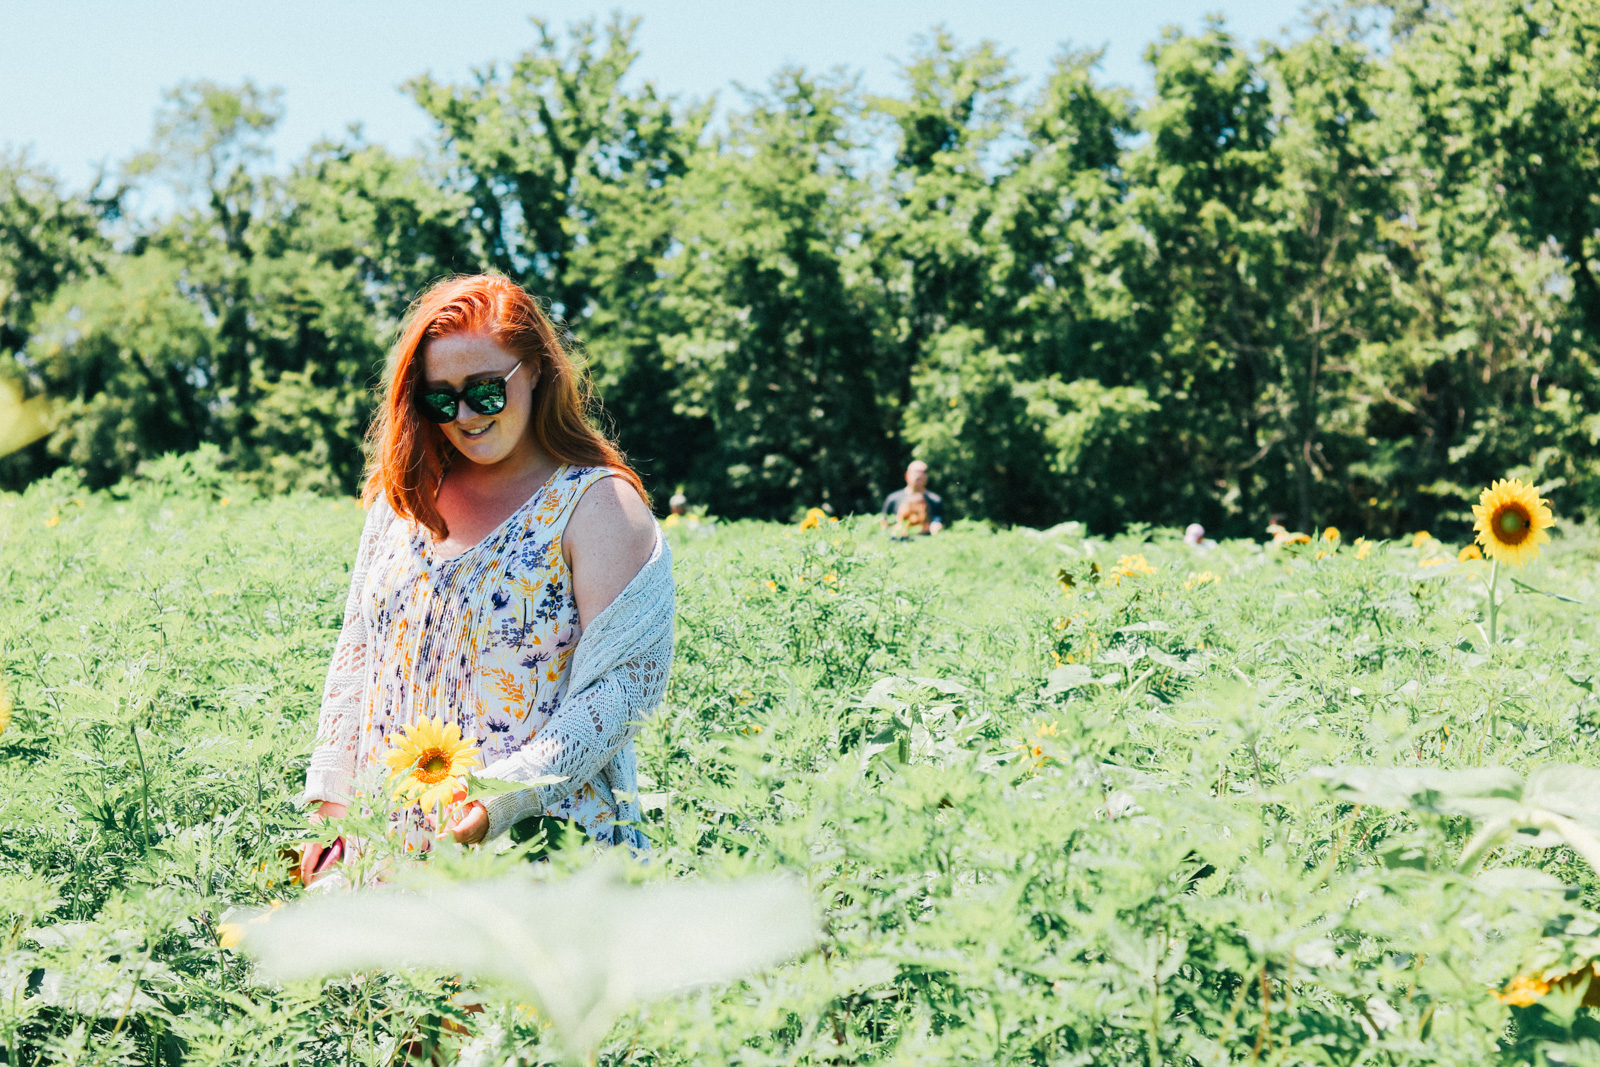 Vineyard and sunflower field exploring for the perfect girls day out and brunch alternative